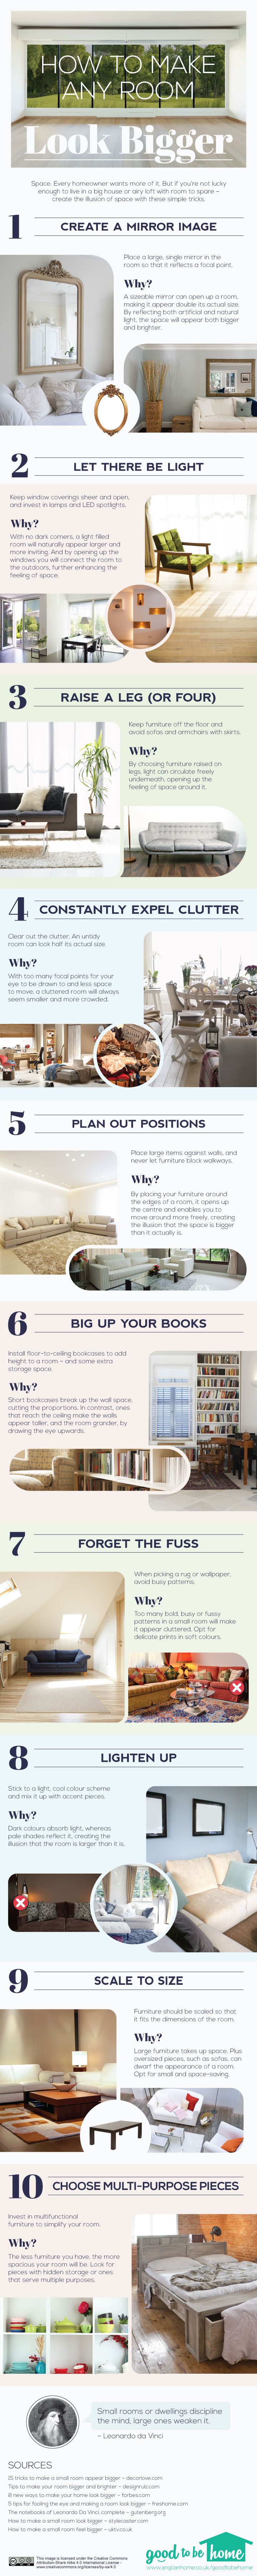 How to Make Any Room Look Bigger #infographic